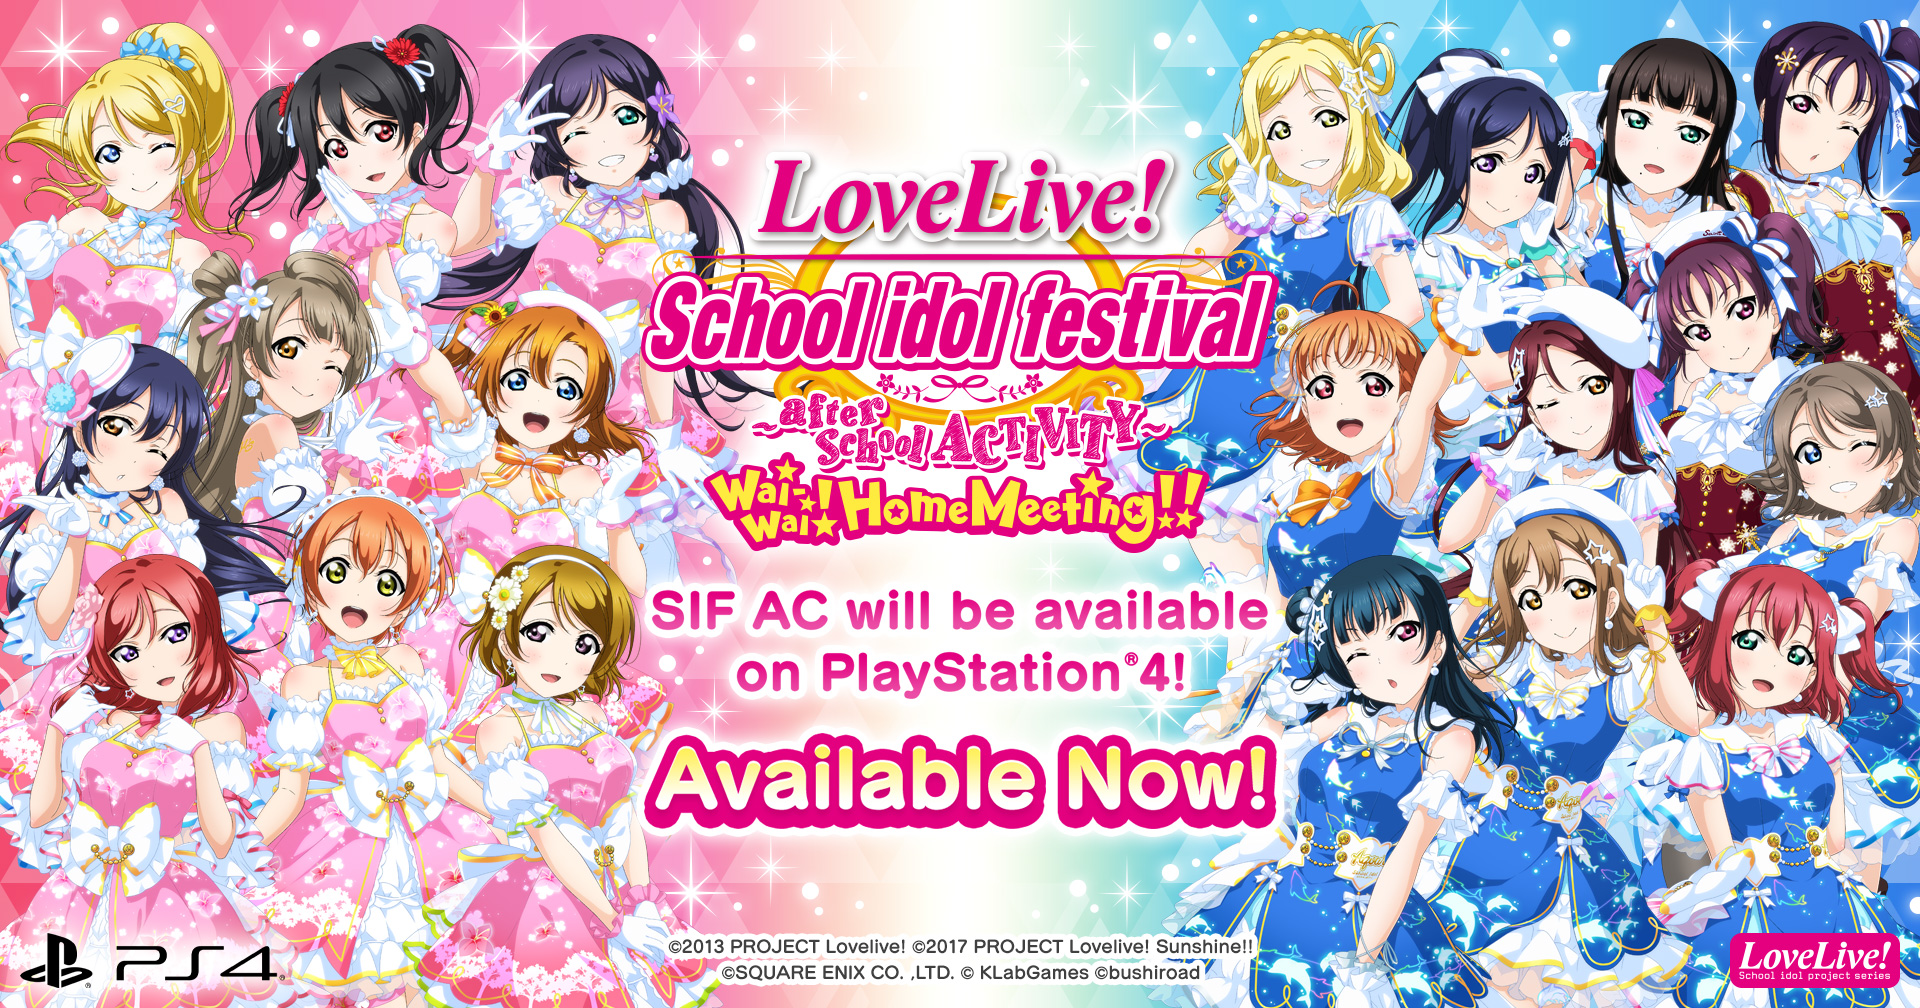 Play Live Show How To Play Love Live School Idol Festival After School Activity Wai Wai Home Meeting Official Web Site Square Enix